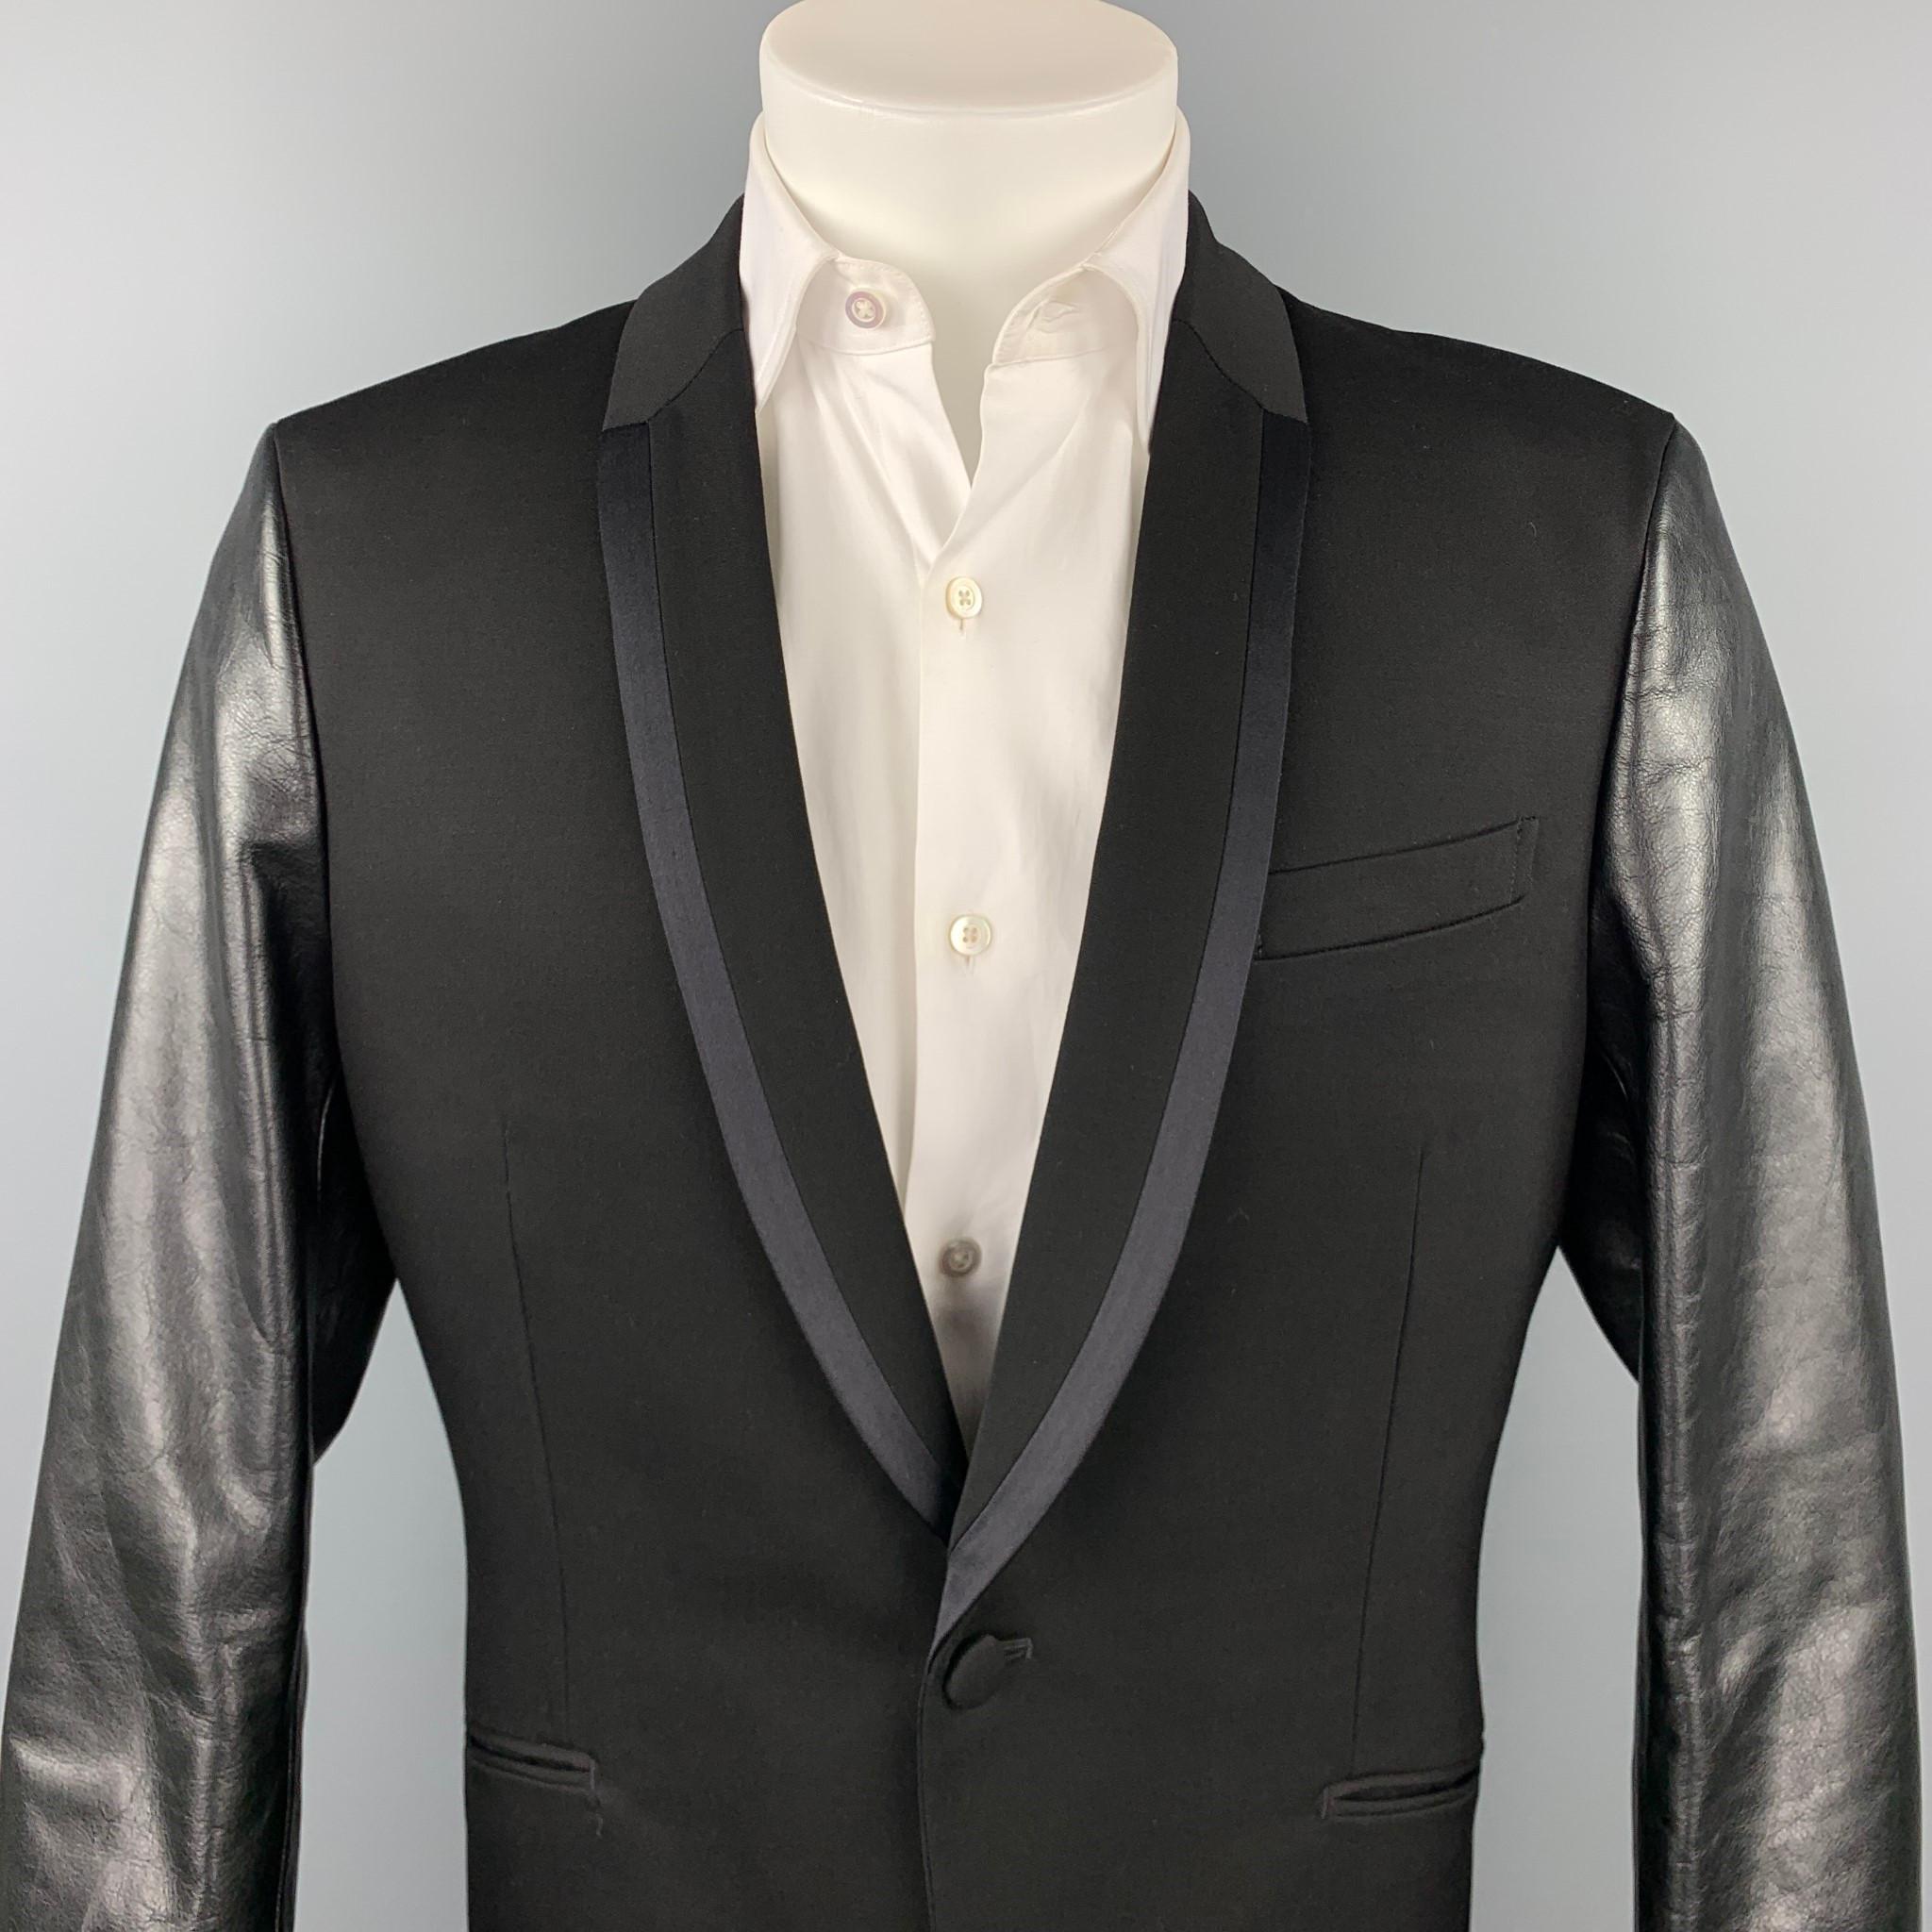 JUNYA WATANABE sport coat comes in a black wool with leather sleeves featuring a shawl collar, full liner, slit pockets, and a single button closure. Made in Japan.

Excellent Pre-Owned Condition.
Marked: XL / AD2015

Measurements:

Shoulder: 18